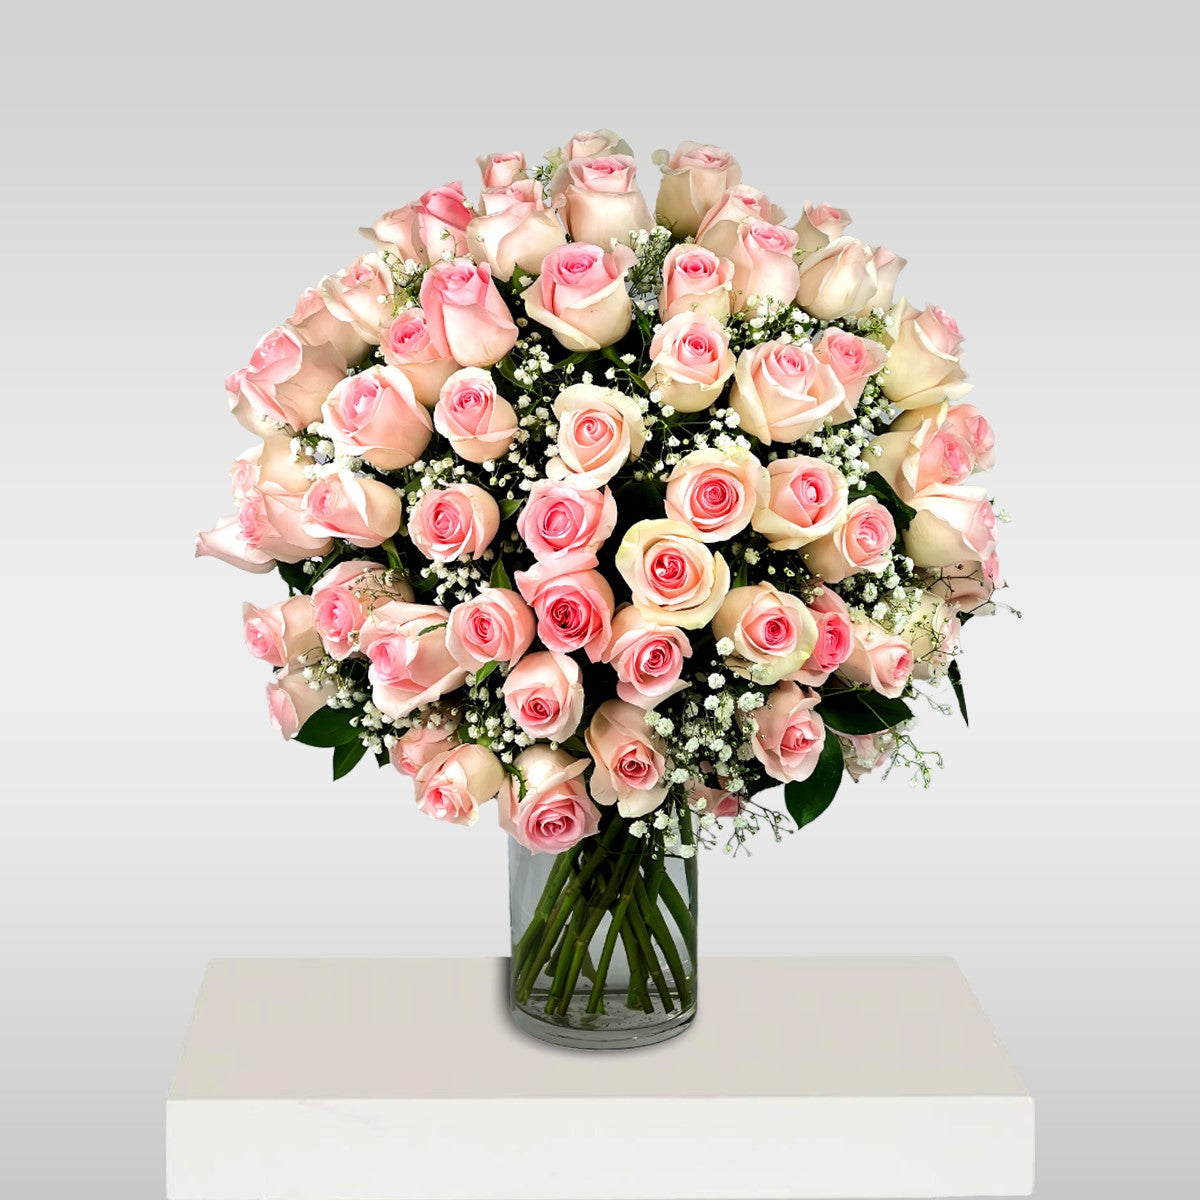 50 Ways of Pink - Arabianblossom - Bouquet of 50 Pink Roses